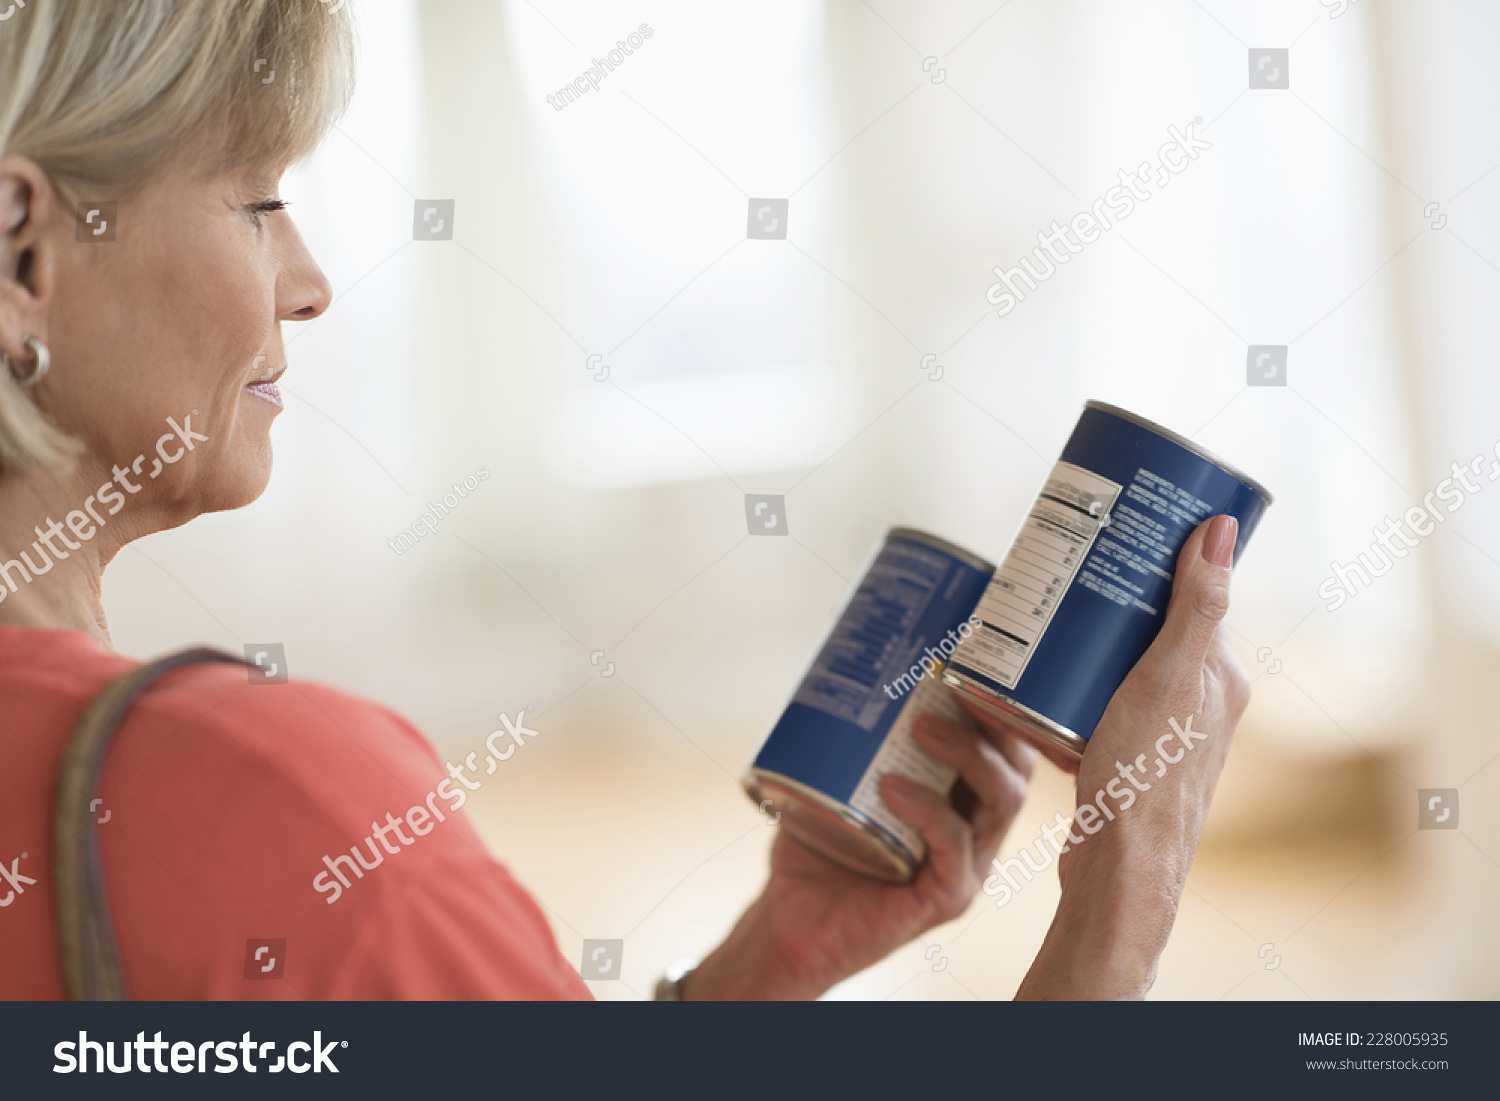 Cropped image of woman comparing products in shop #228005935